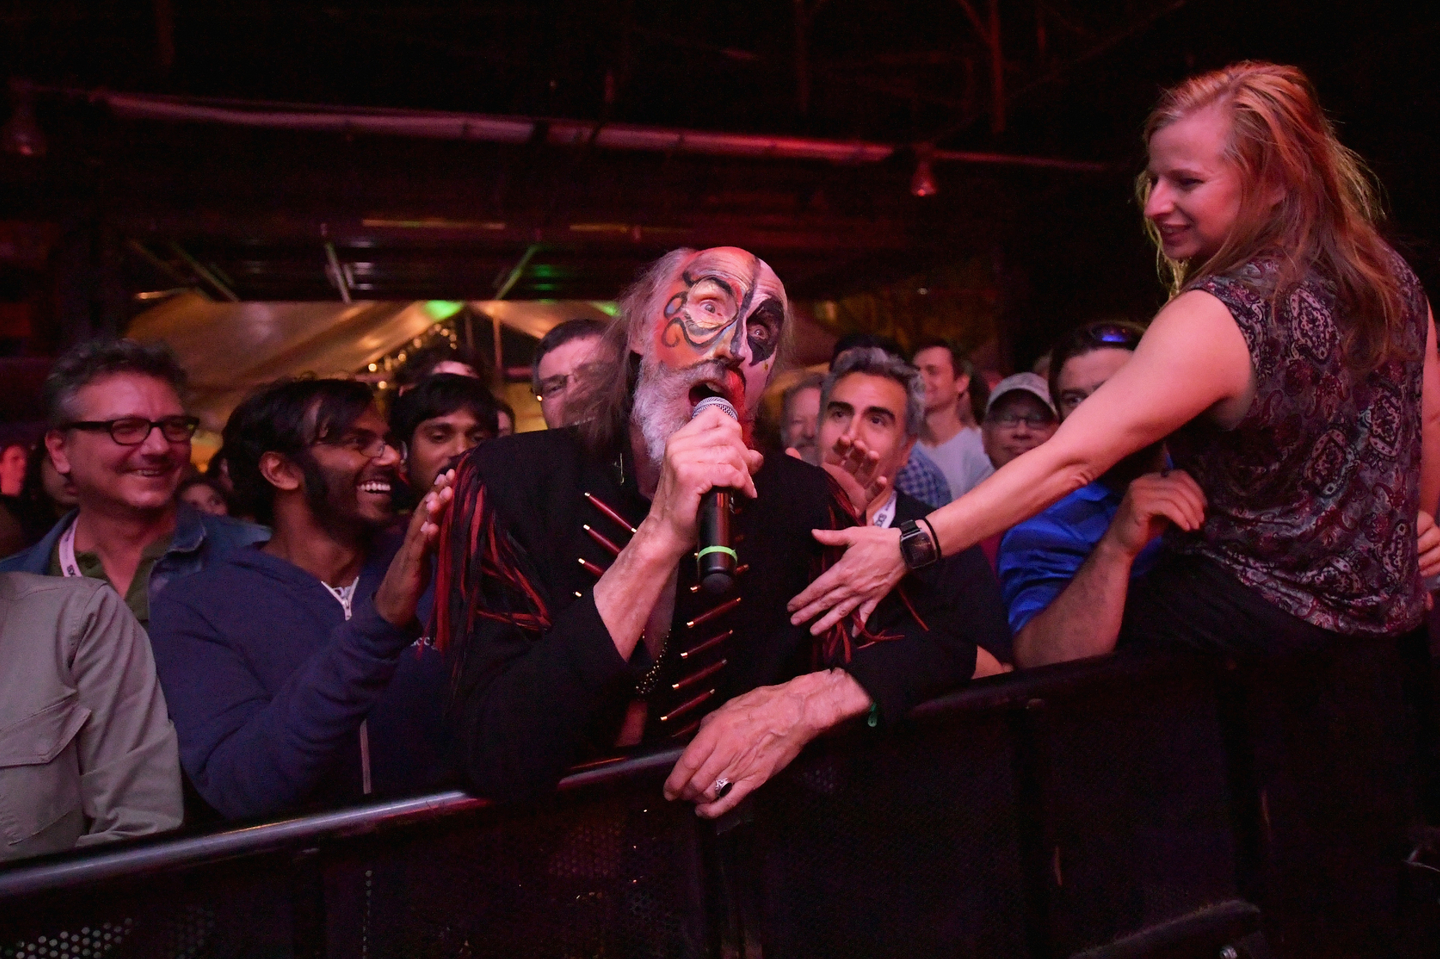 The Crazy World of Arthur Brown at Empire Garage, presented by LPR x Psycho Entertainment – Photo by Danny Matson/Getty Images for SXSW